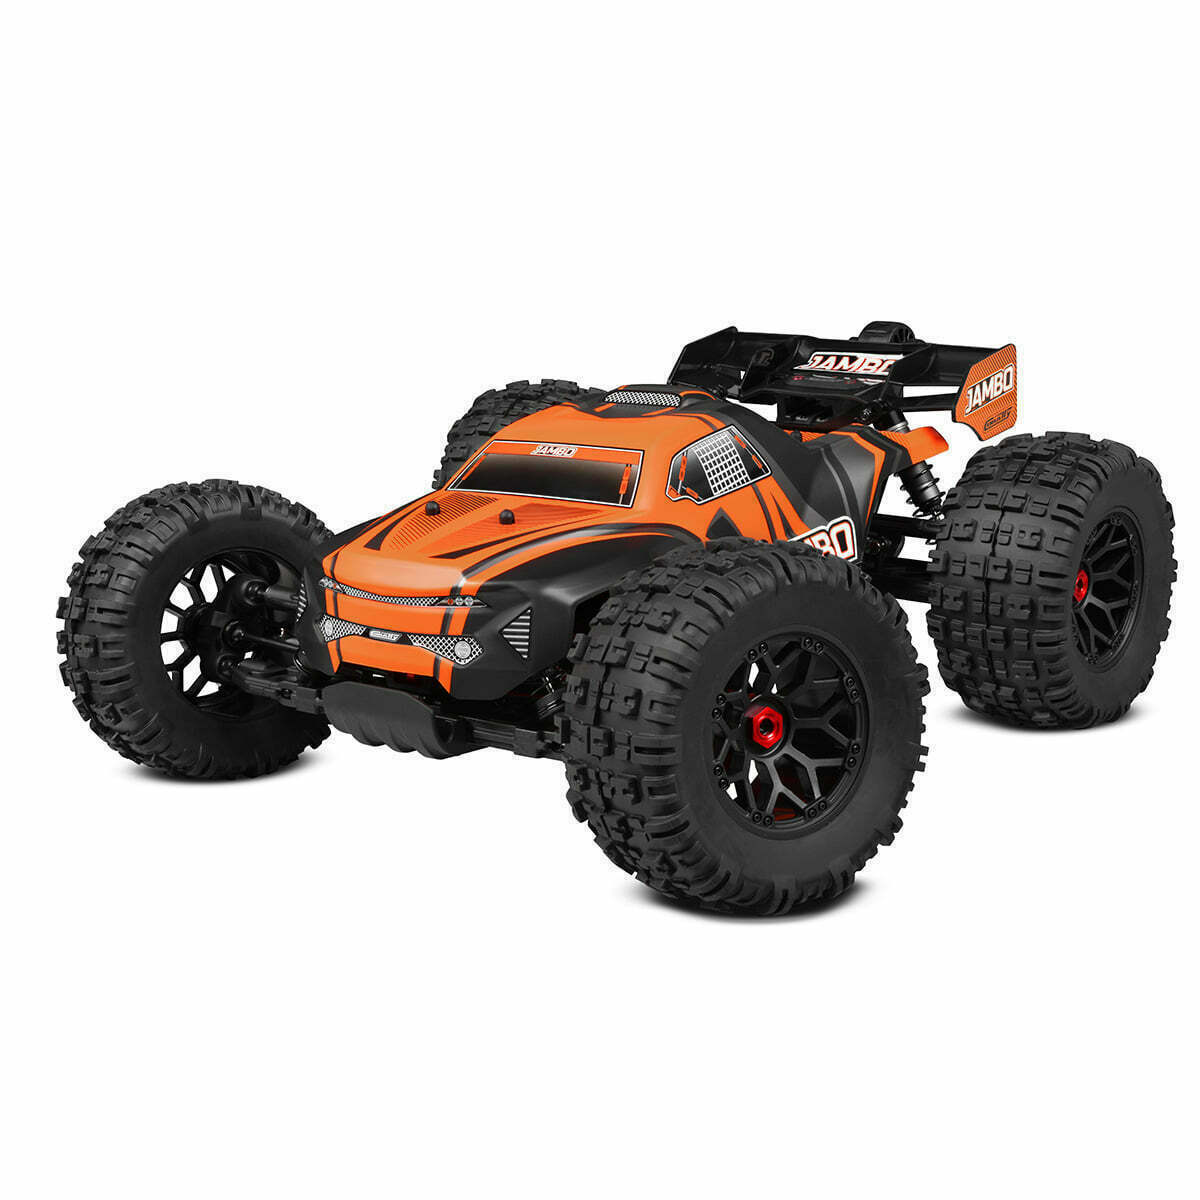 Team Corally Jambo XP 1/8 Monster Truck 4WD 6S Brushless RTR COR00166